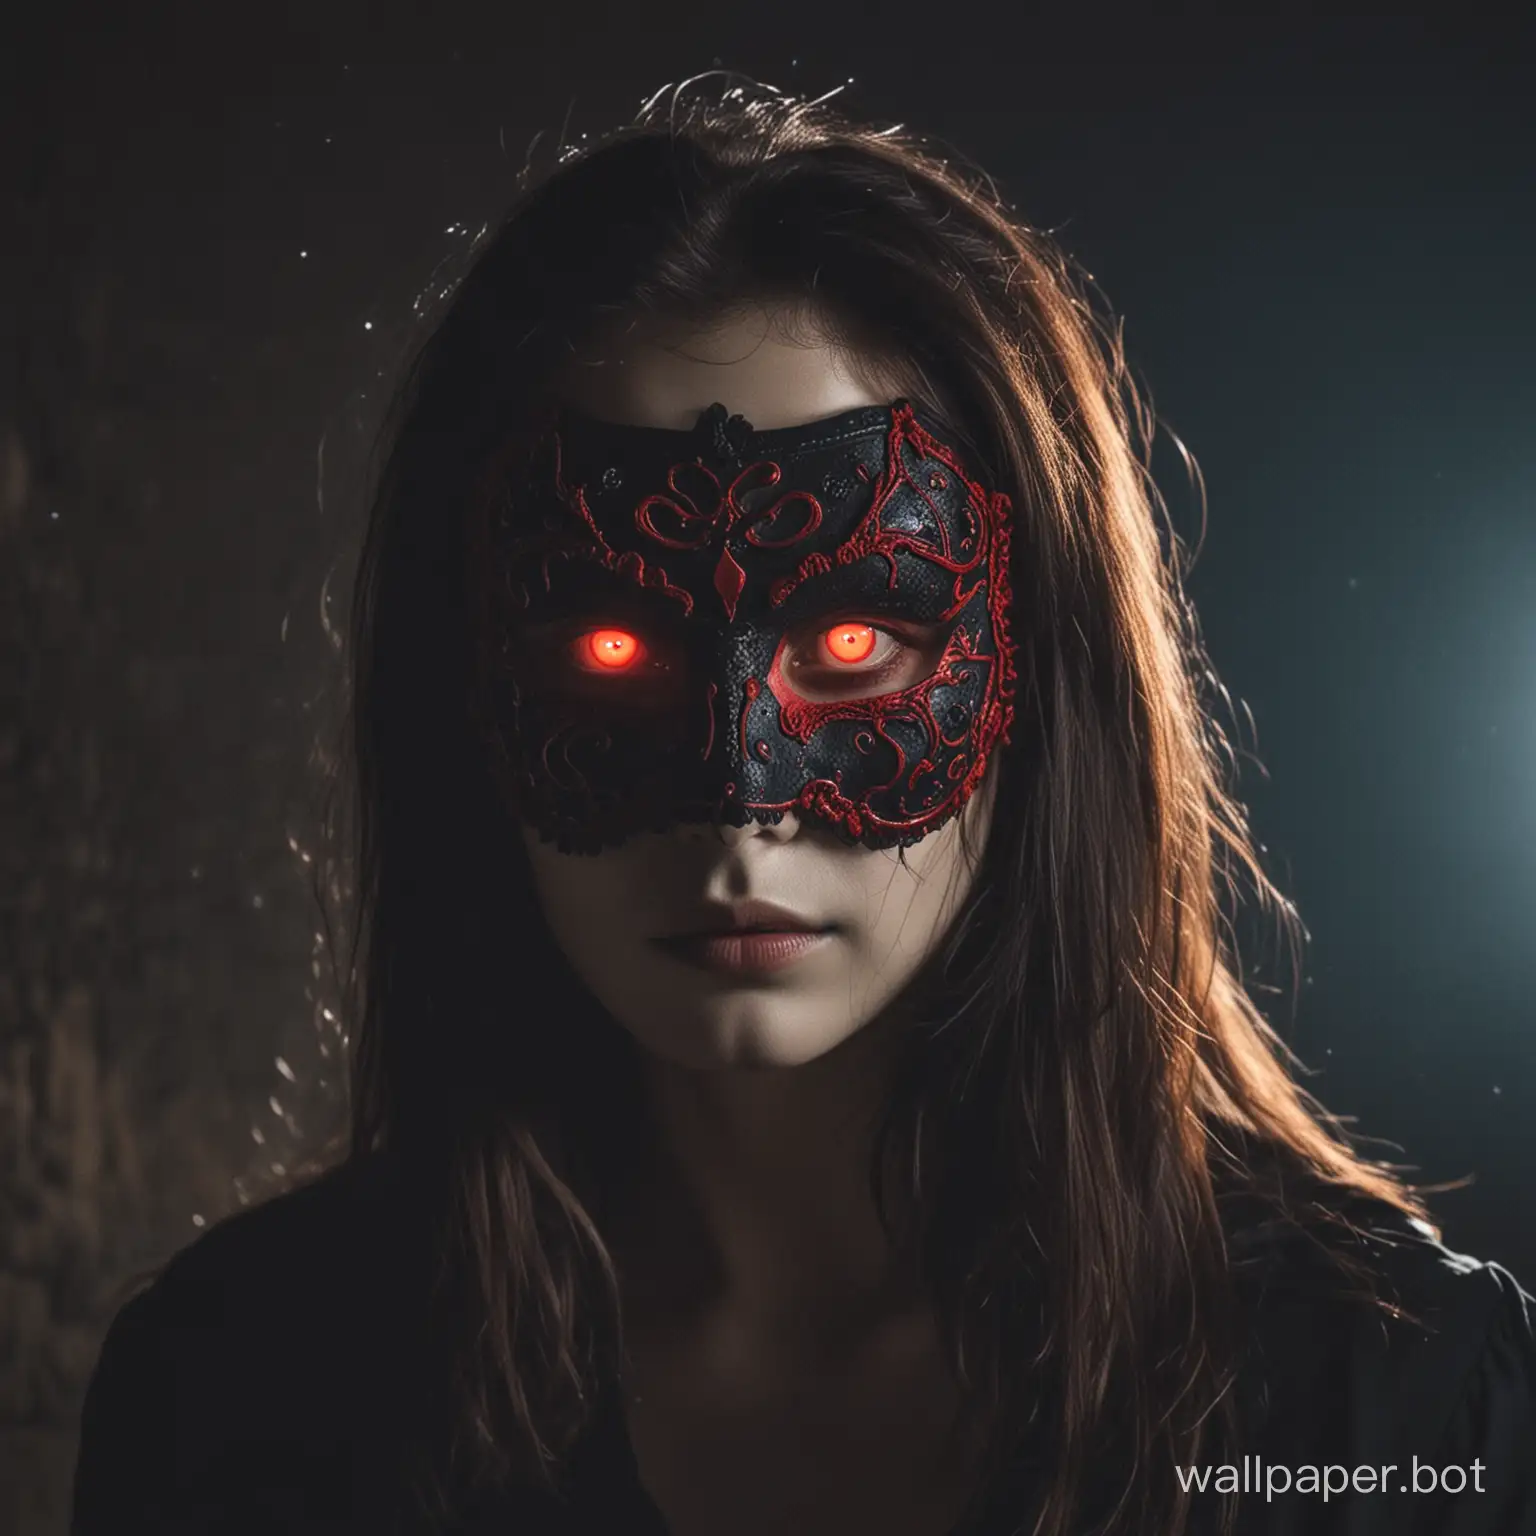 Red eyes in a mask in the night